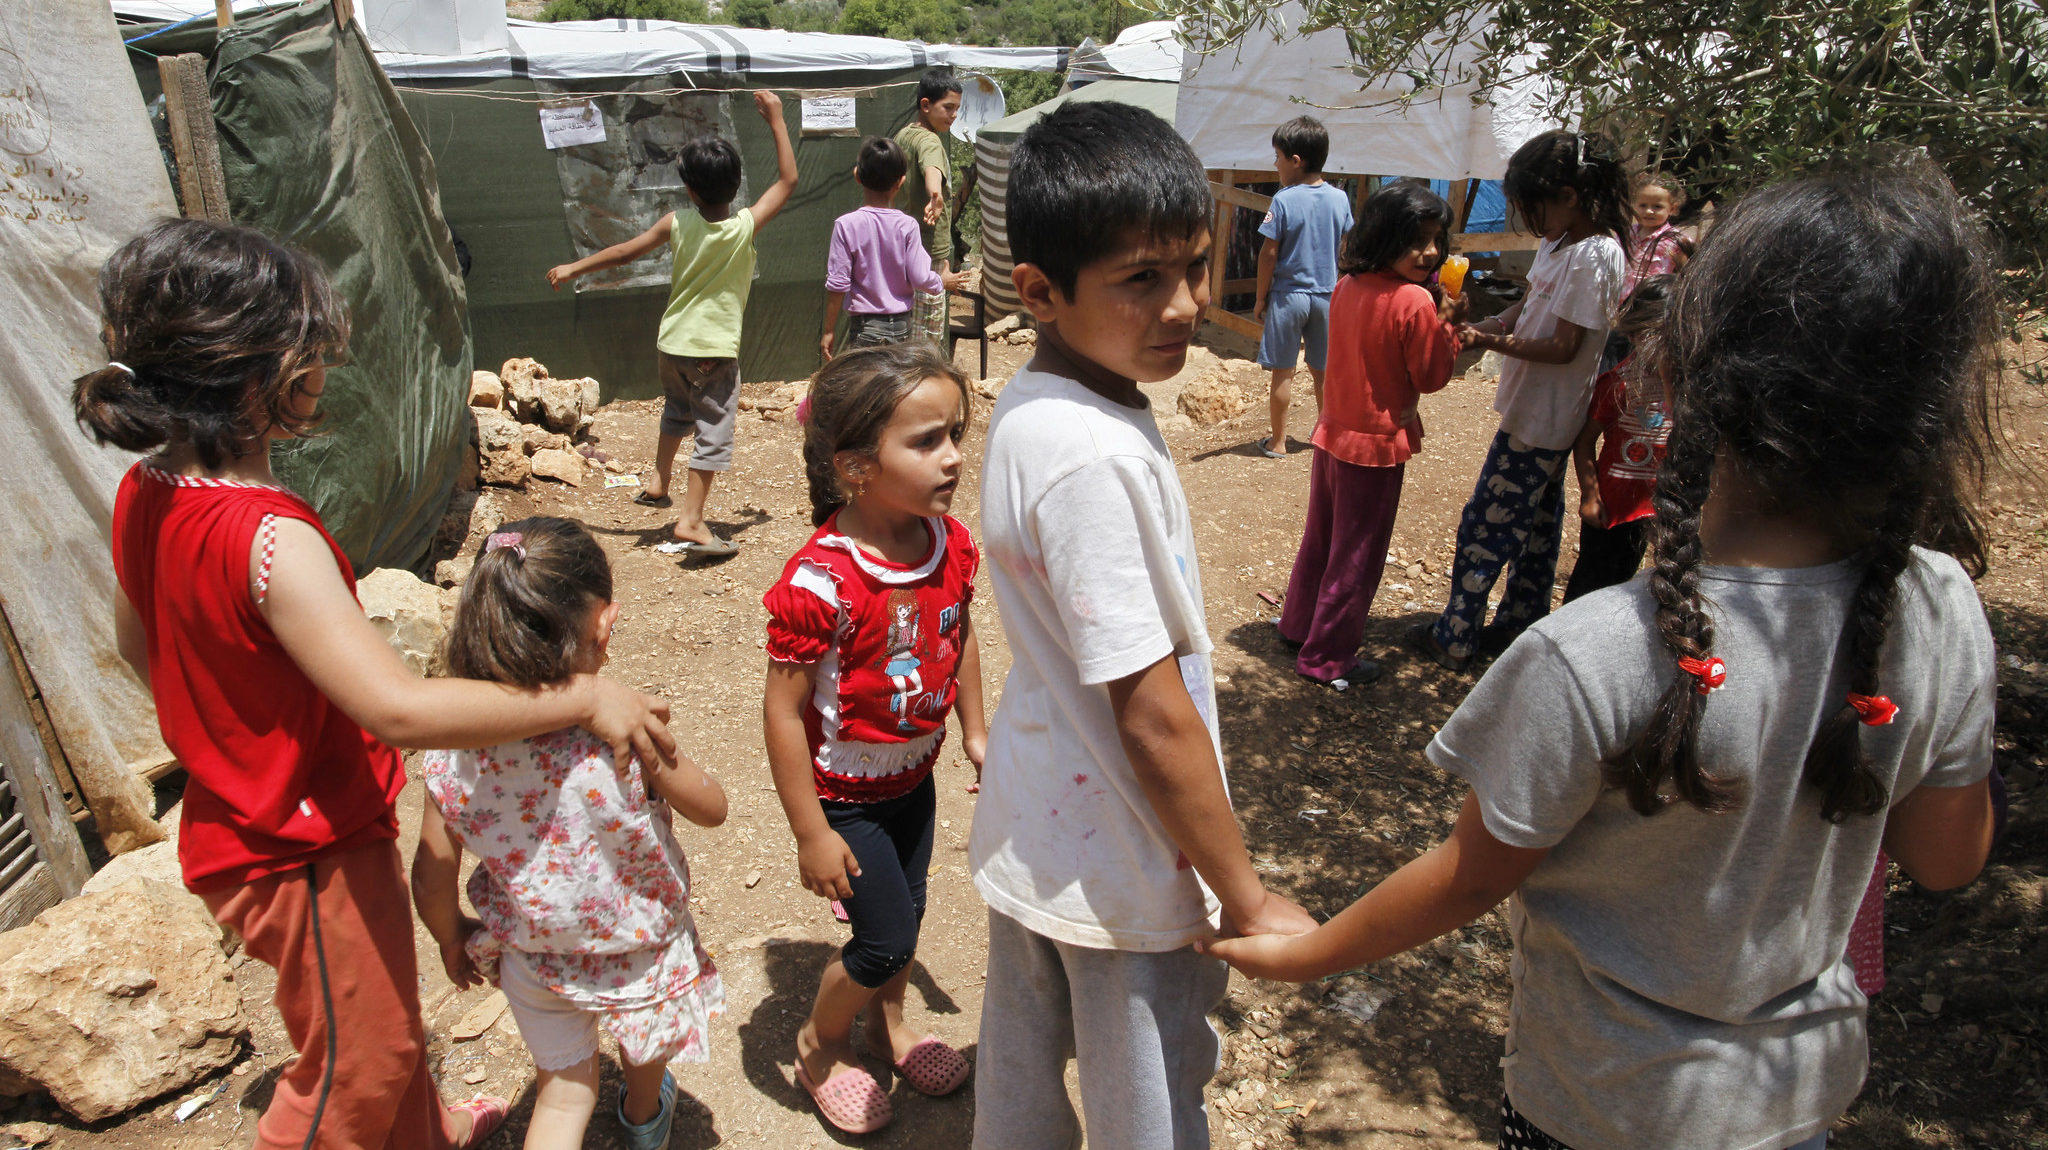 UK Funding Will Support Education in Syria, Conflict Zones